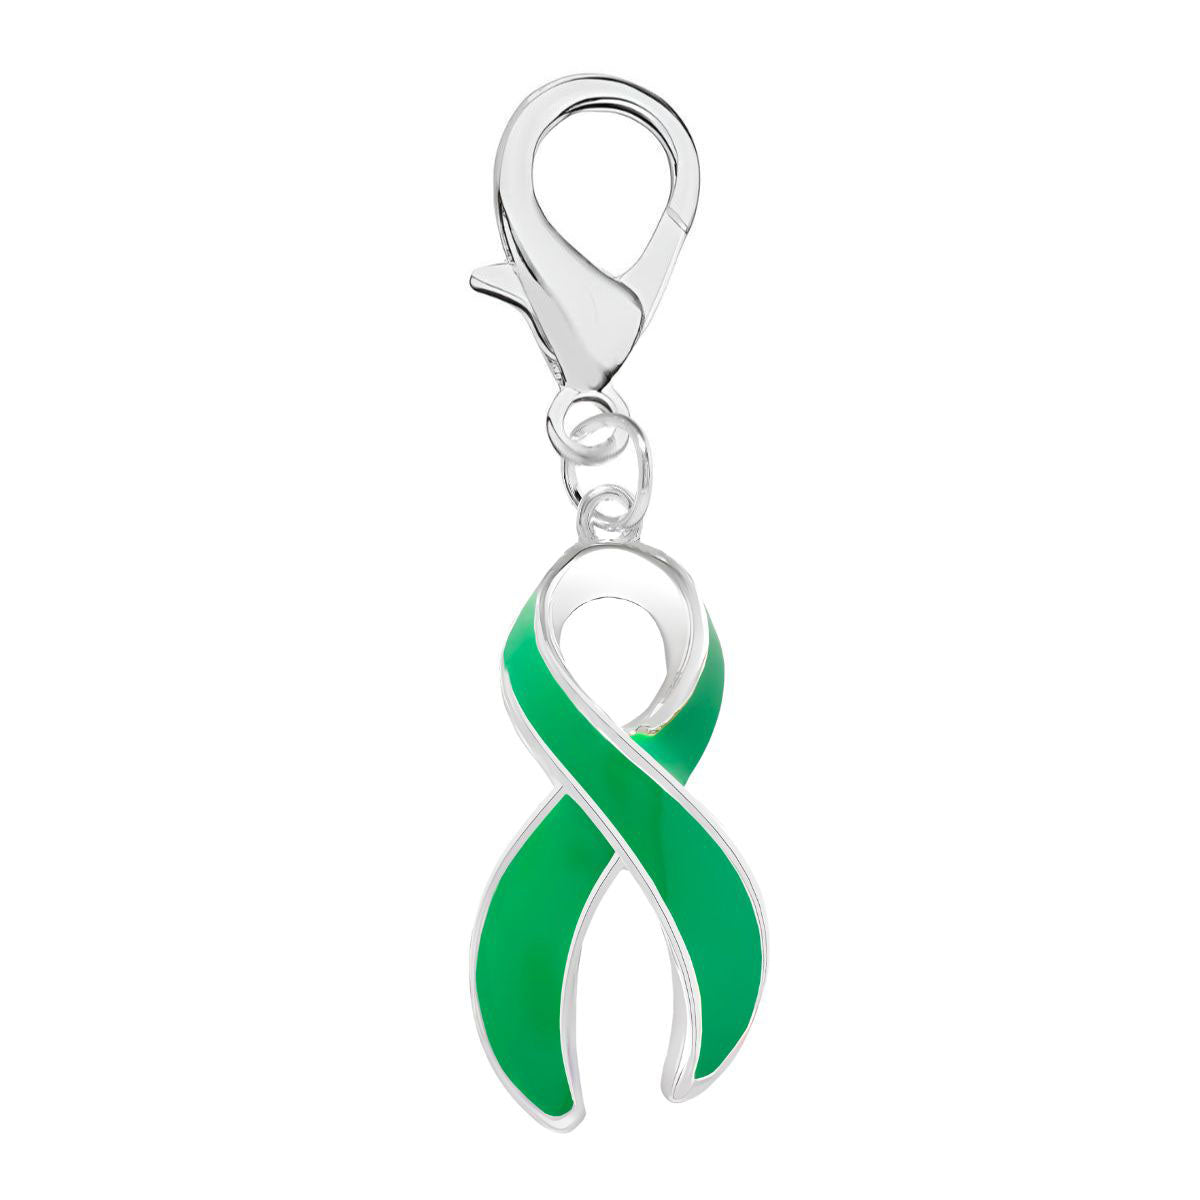 12 Large Green Ribbon Hanging Charms - Fundraising For A Cause